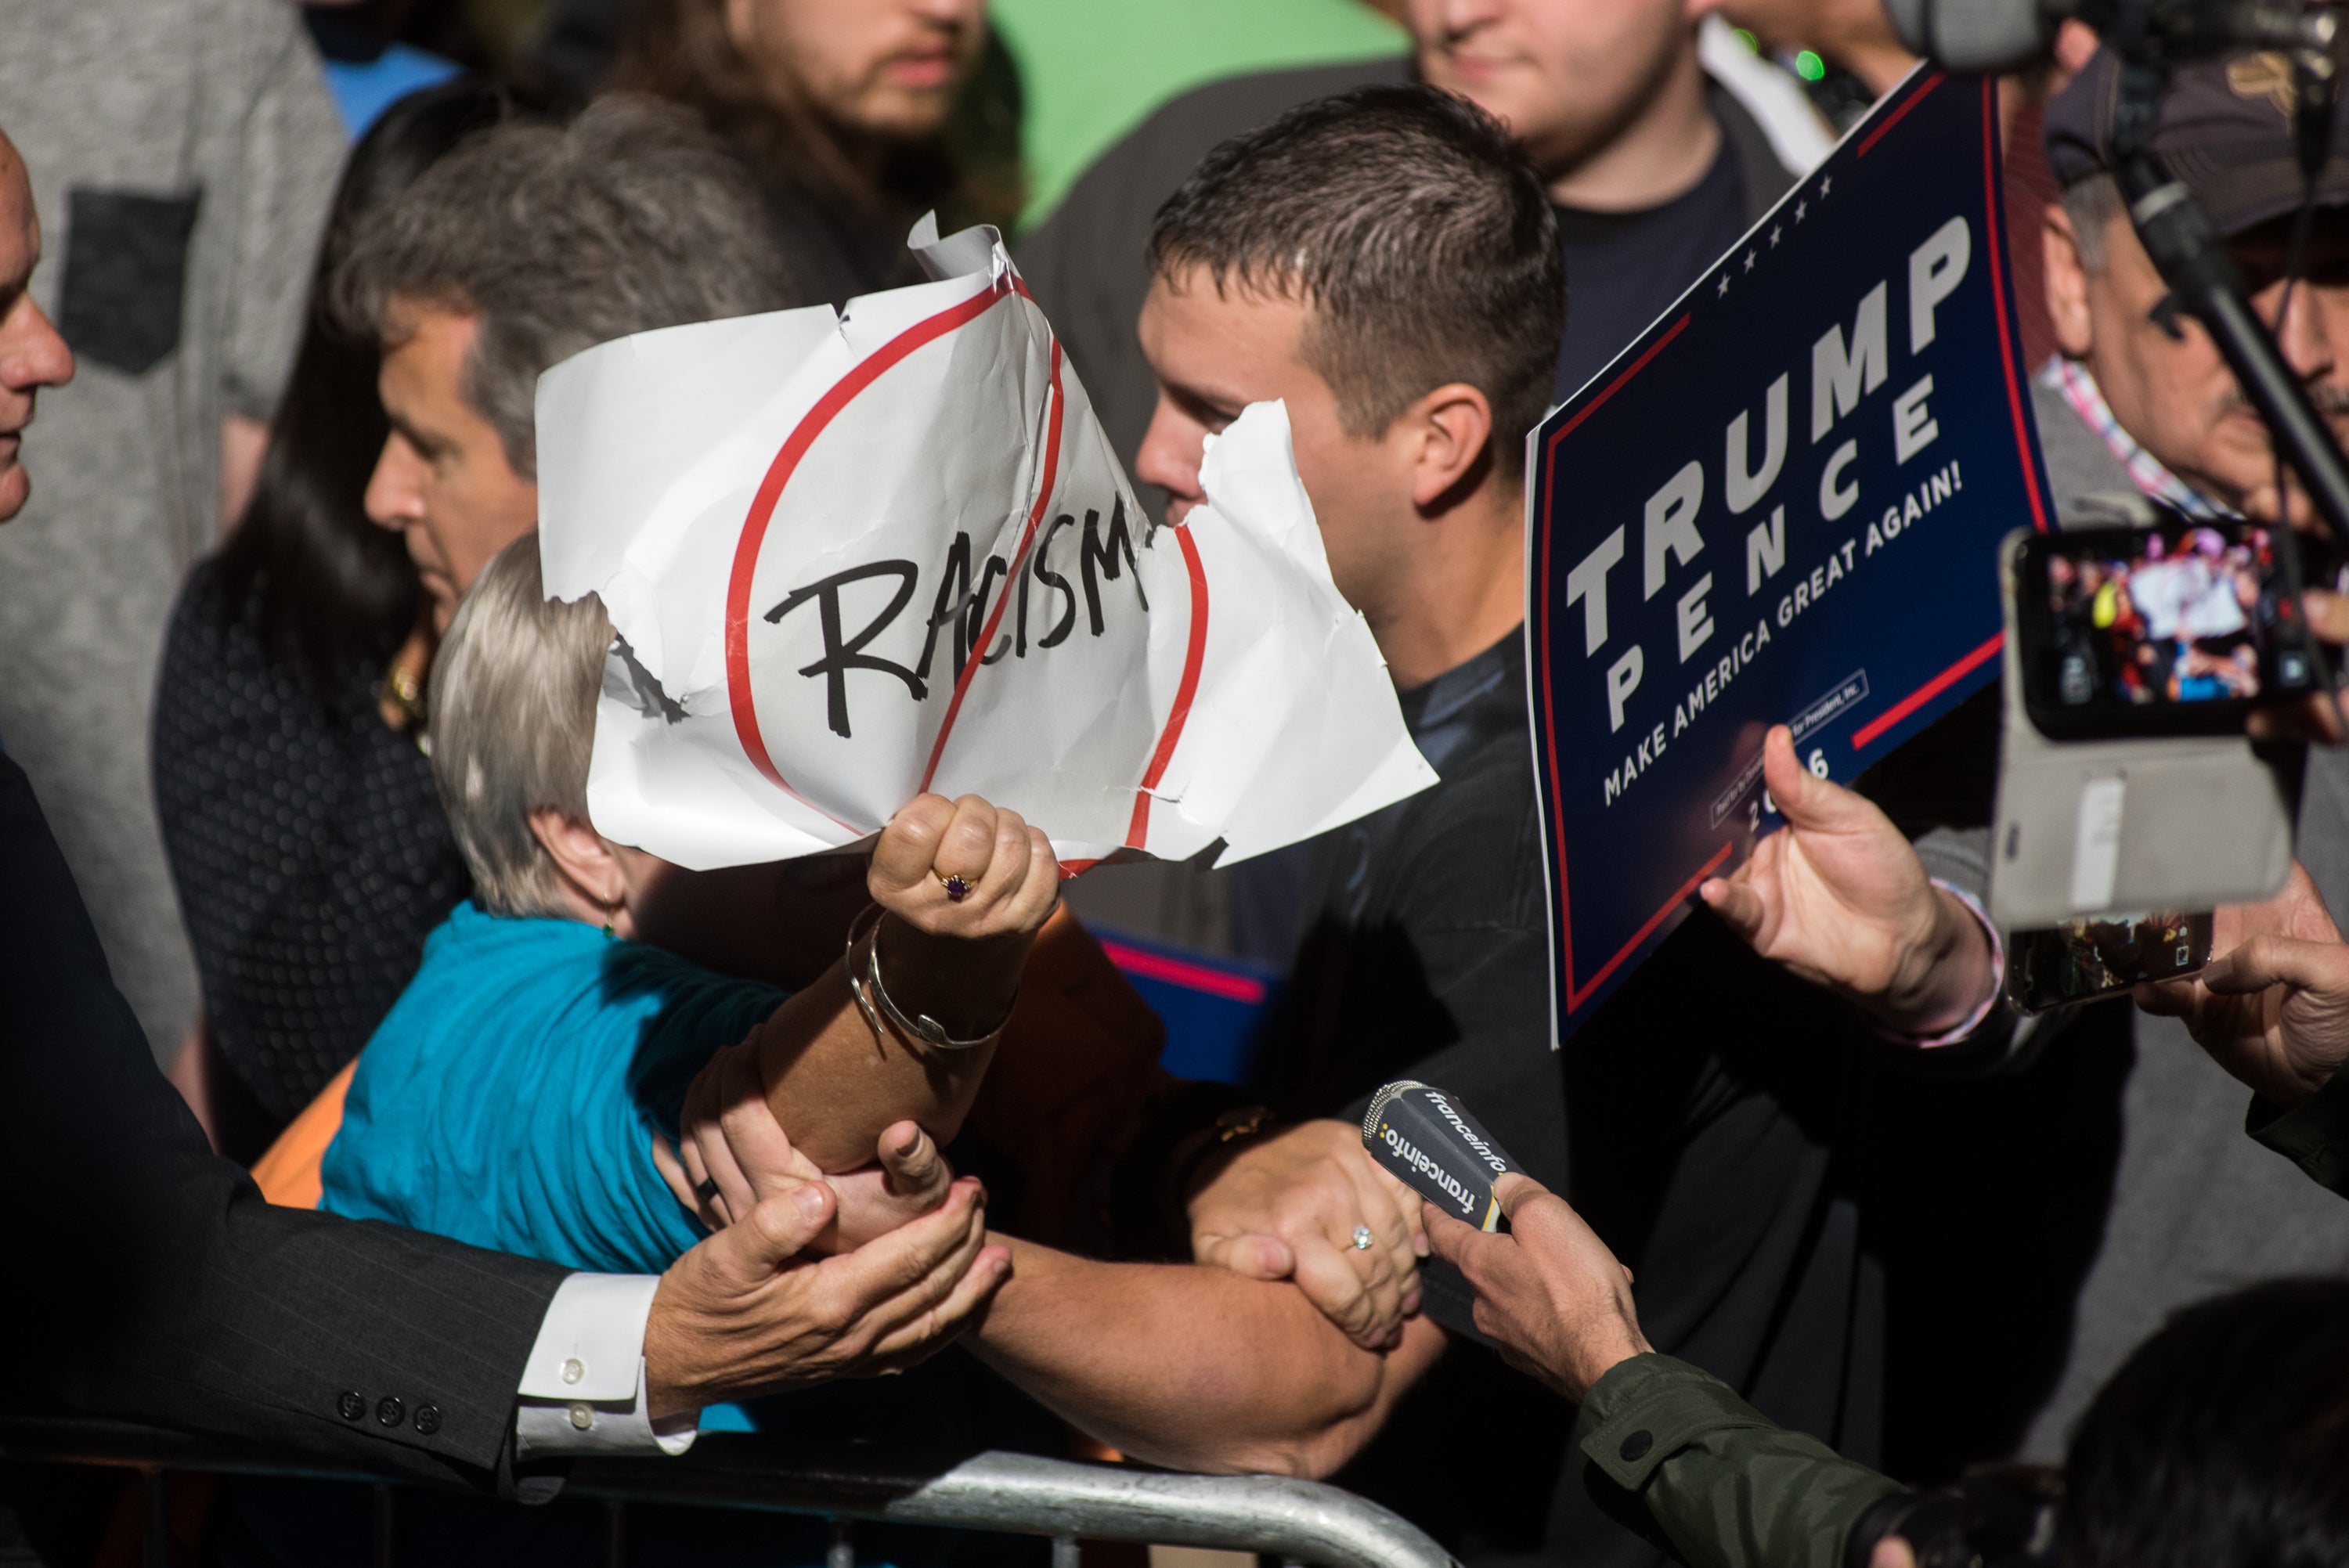 A protester with an anti-racism sign is confronted and removed from a rally for Republican Presidential candidate Donald J. Trump at the McGrath Amphitheater on October 28, 2016 in Cedar Rapids, Iowa. The state’s governor has signed a bill cracking down on crimes associated with protests